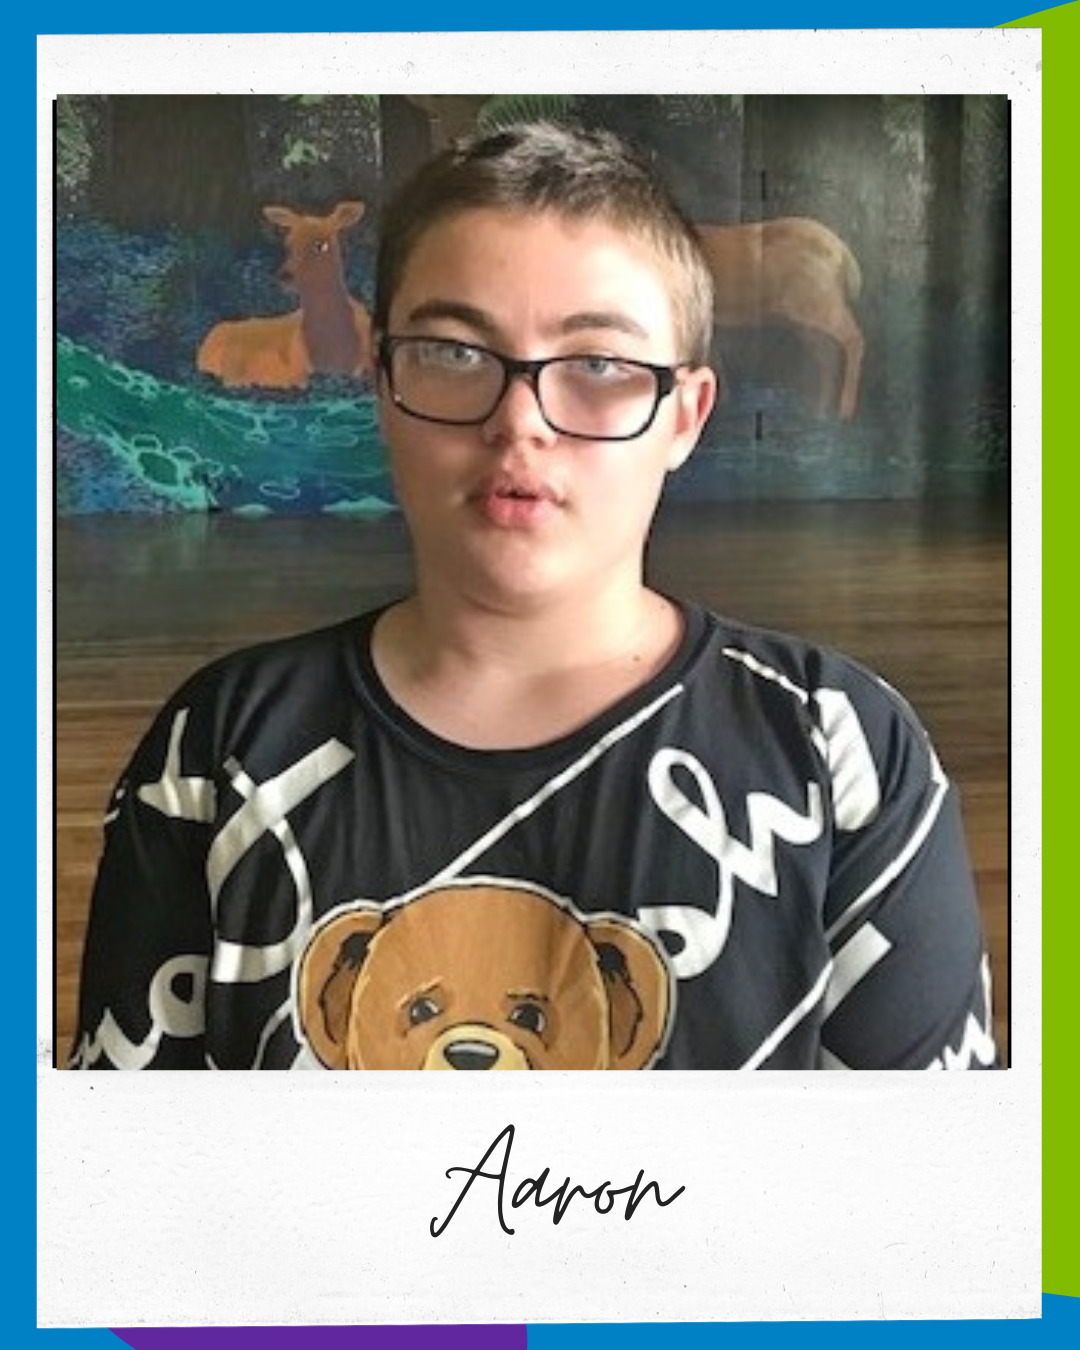 Aaron - April Member of the Month